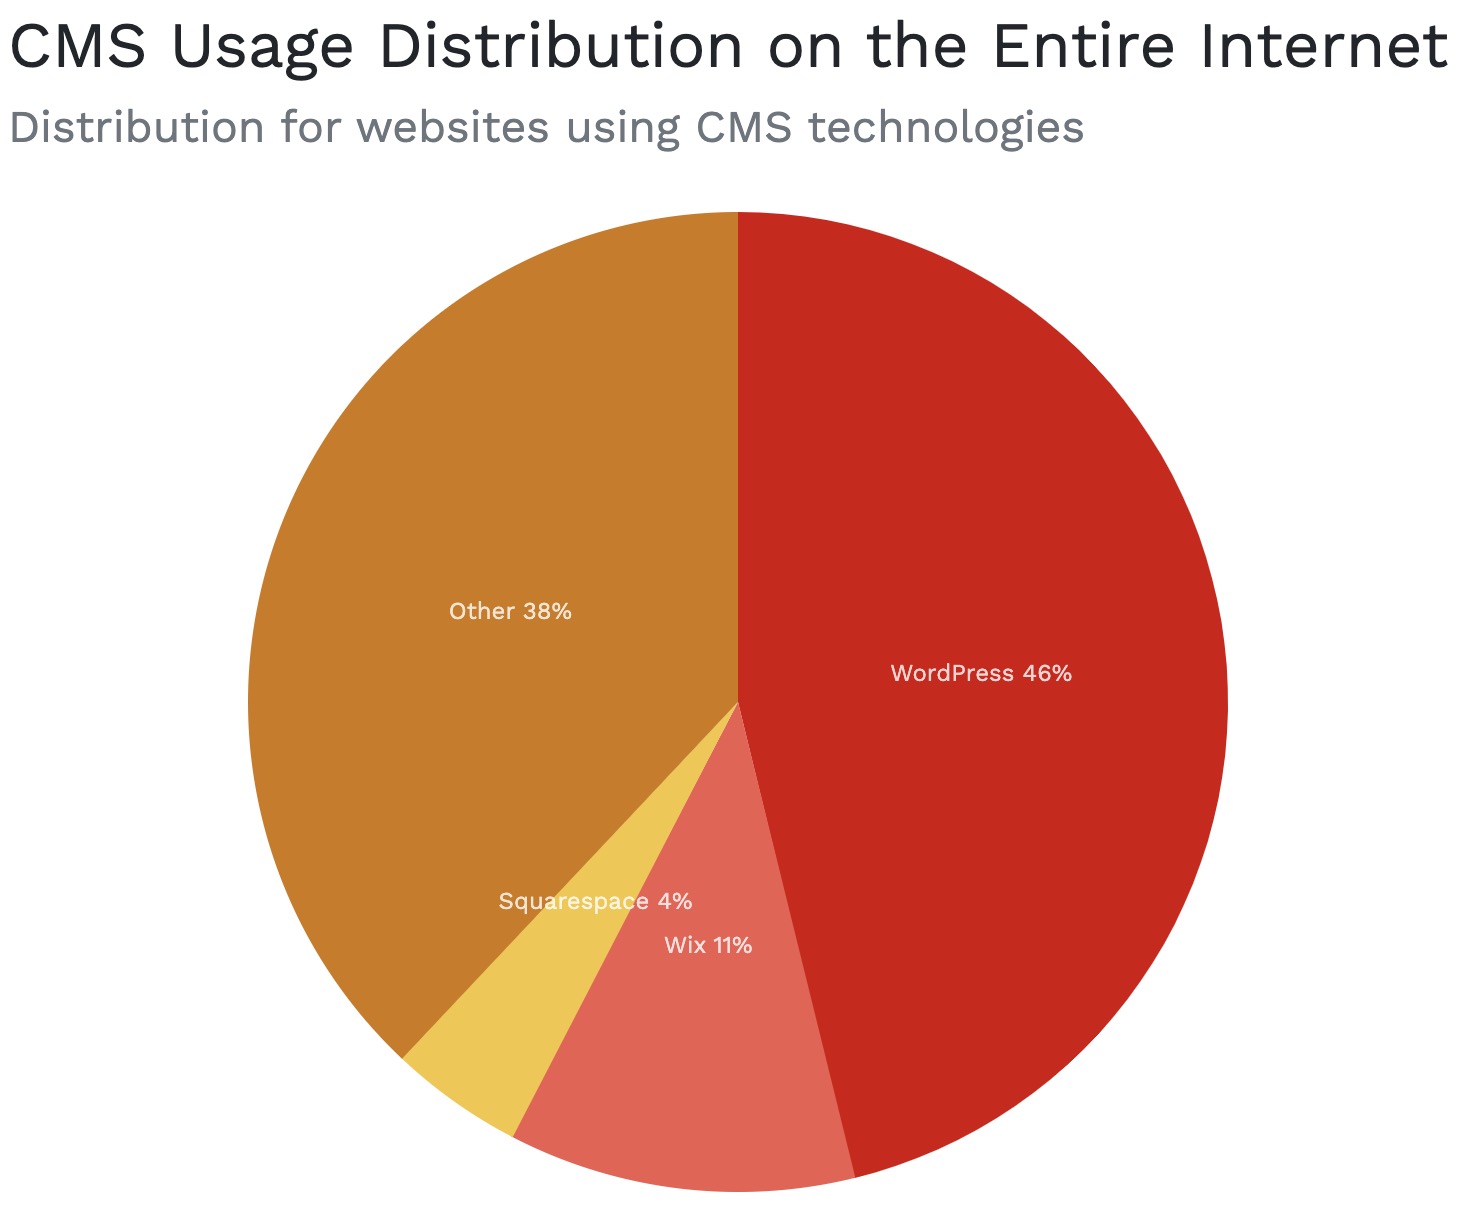 A pie chart showing WordPress has a 46% cms usage on the internet, Wix has 11%, Squarespace has 4%, and "other" has 38%